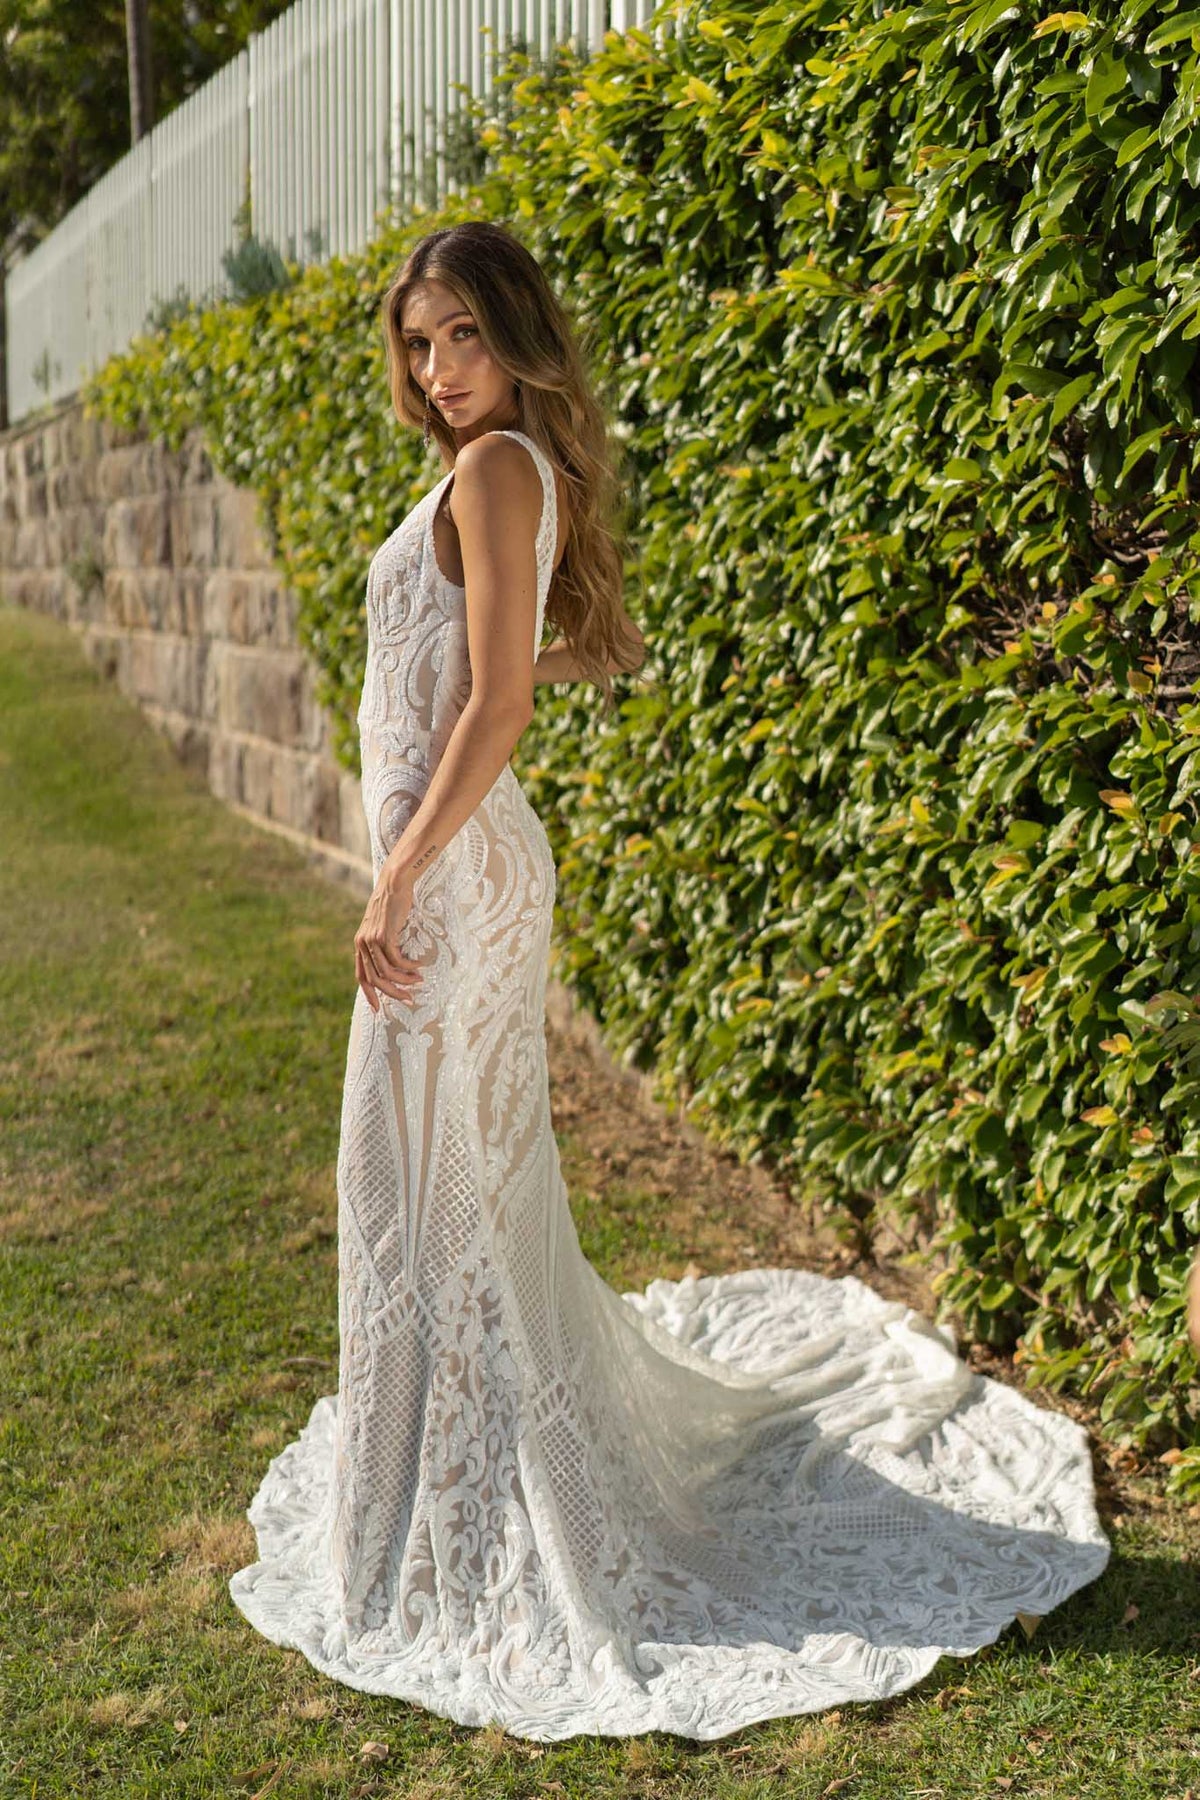 Side Image of White Embroidered Pattern Sequin with Nude Lining Floor Length Sleeveless Evening Dress with V-Neckline and Mermaid Skirt